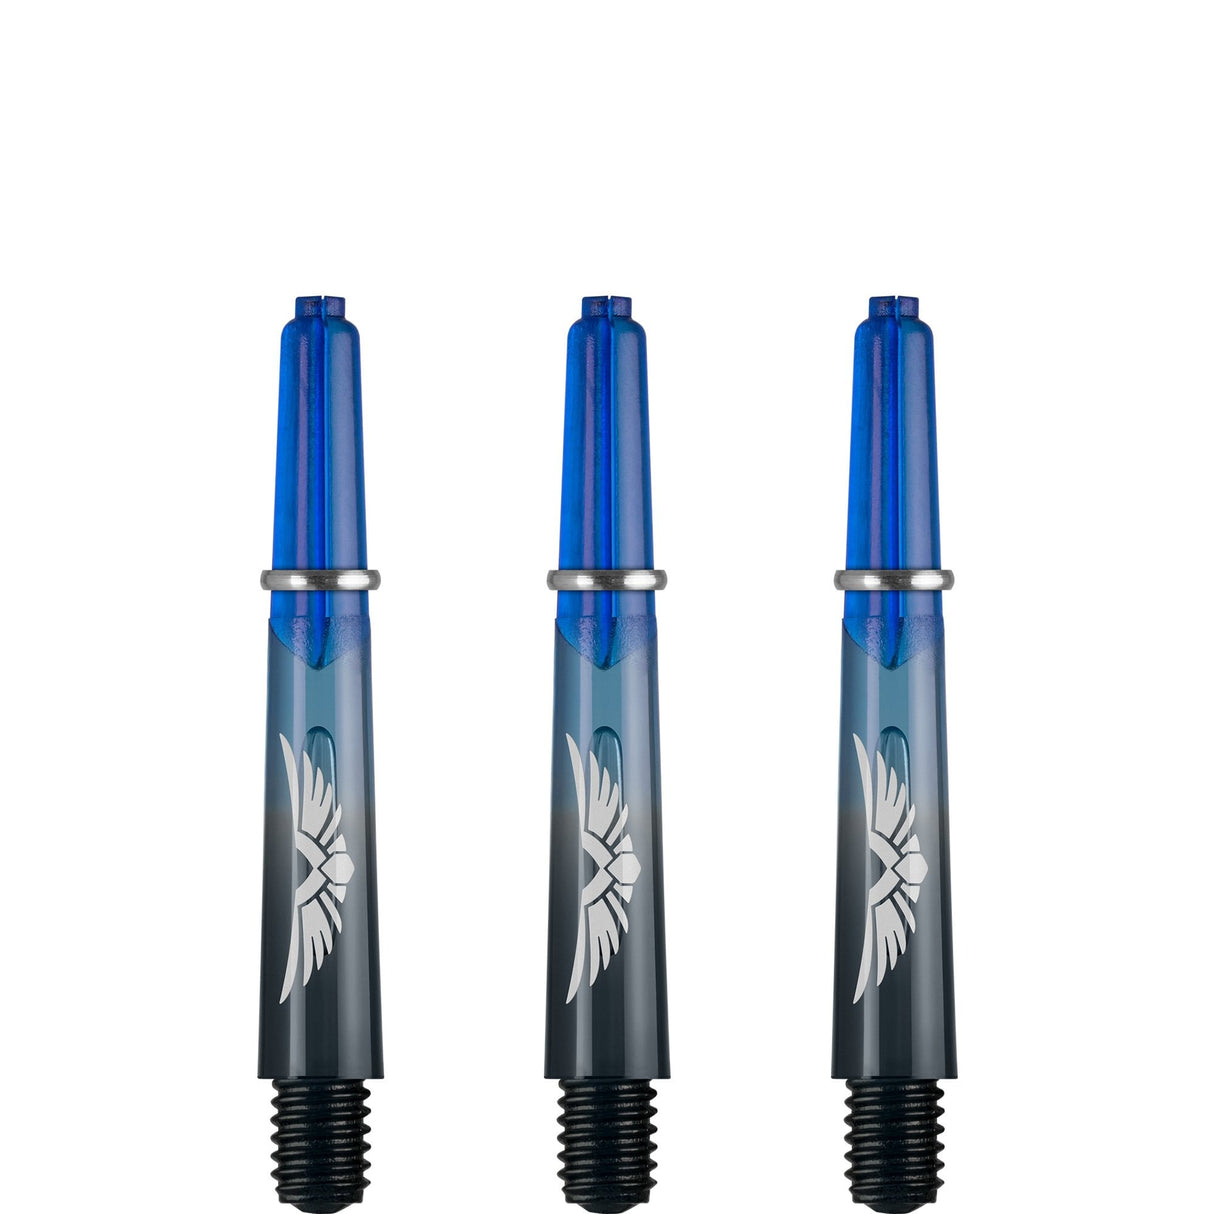 Shot Eagle Claw Dart Shafts - with Machined Rings - Strong Polycarbonate Stems - Black Blue Short